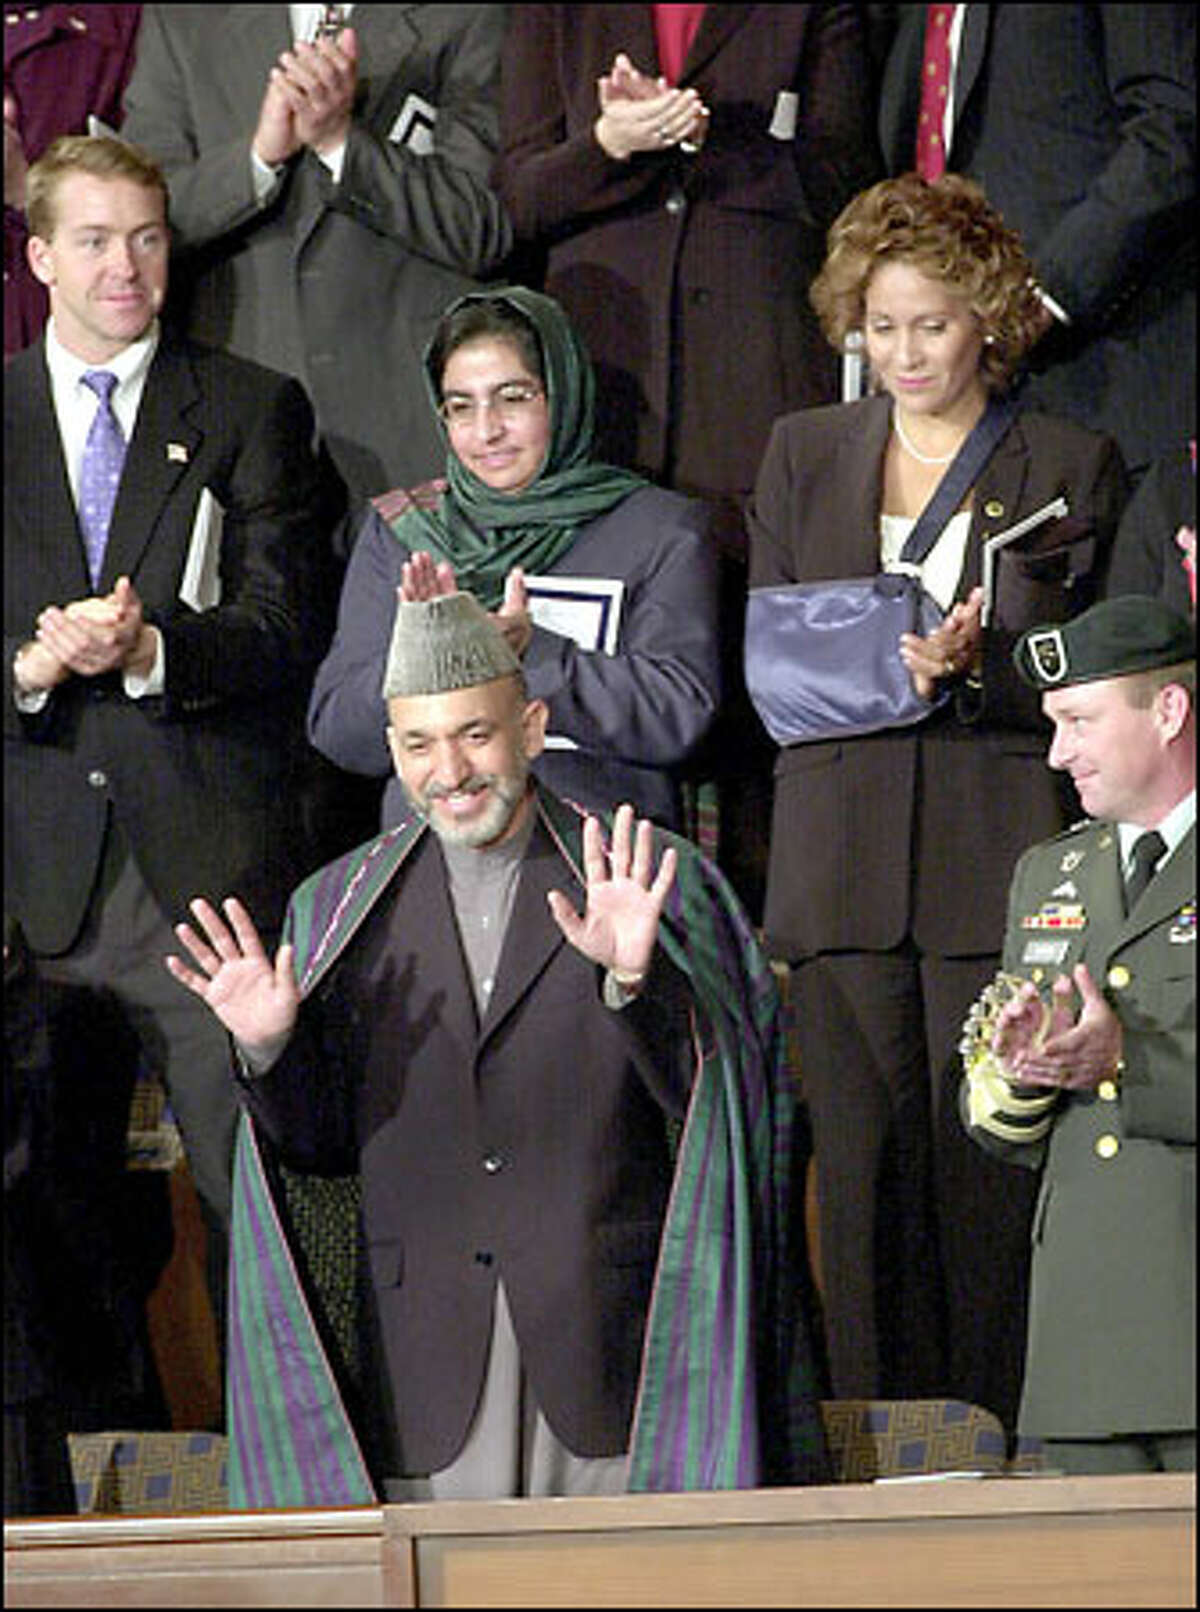 Afghan leader Hamid Karzai acknowledges applause. From left are Winter Olympics skeleton contestant James Shea; Sadoozai Panah, Afghanistan's managing director for women's development; Hermis Moutardier, a flight attendant from American Airlines Flight 63, on which the shoe-bomb suspect was subdued; and Sgt. 1st Class Ronnie Raikes, who was wounded in Afghanistan.